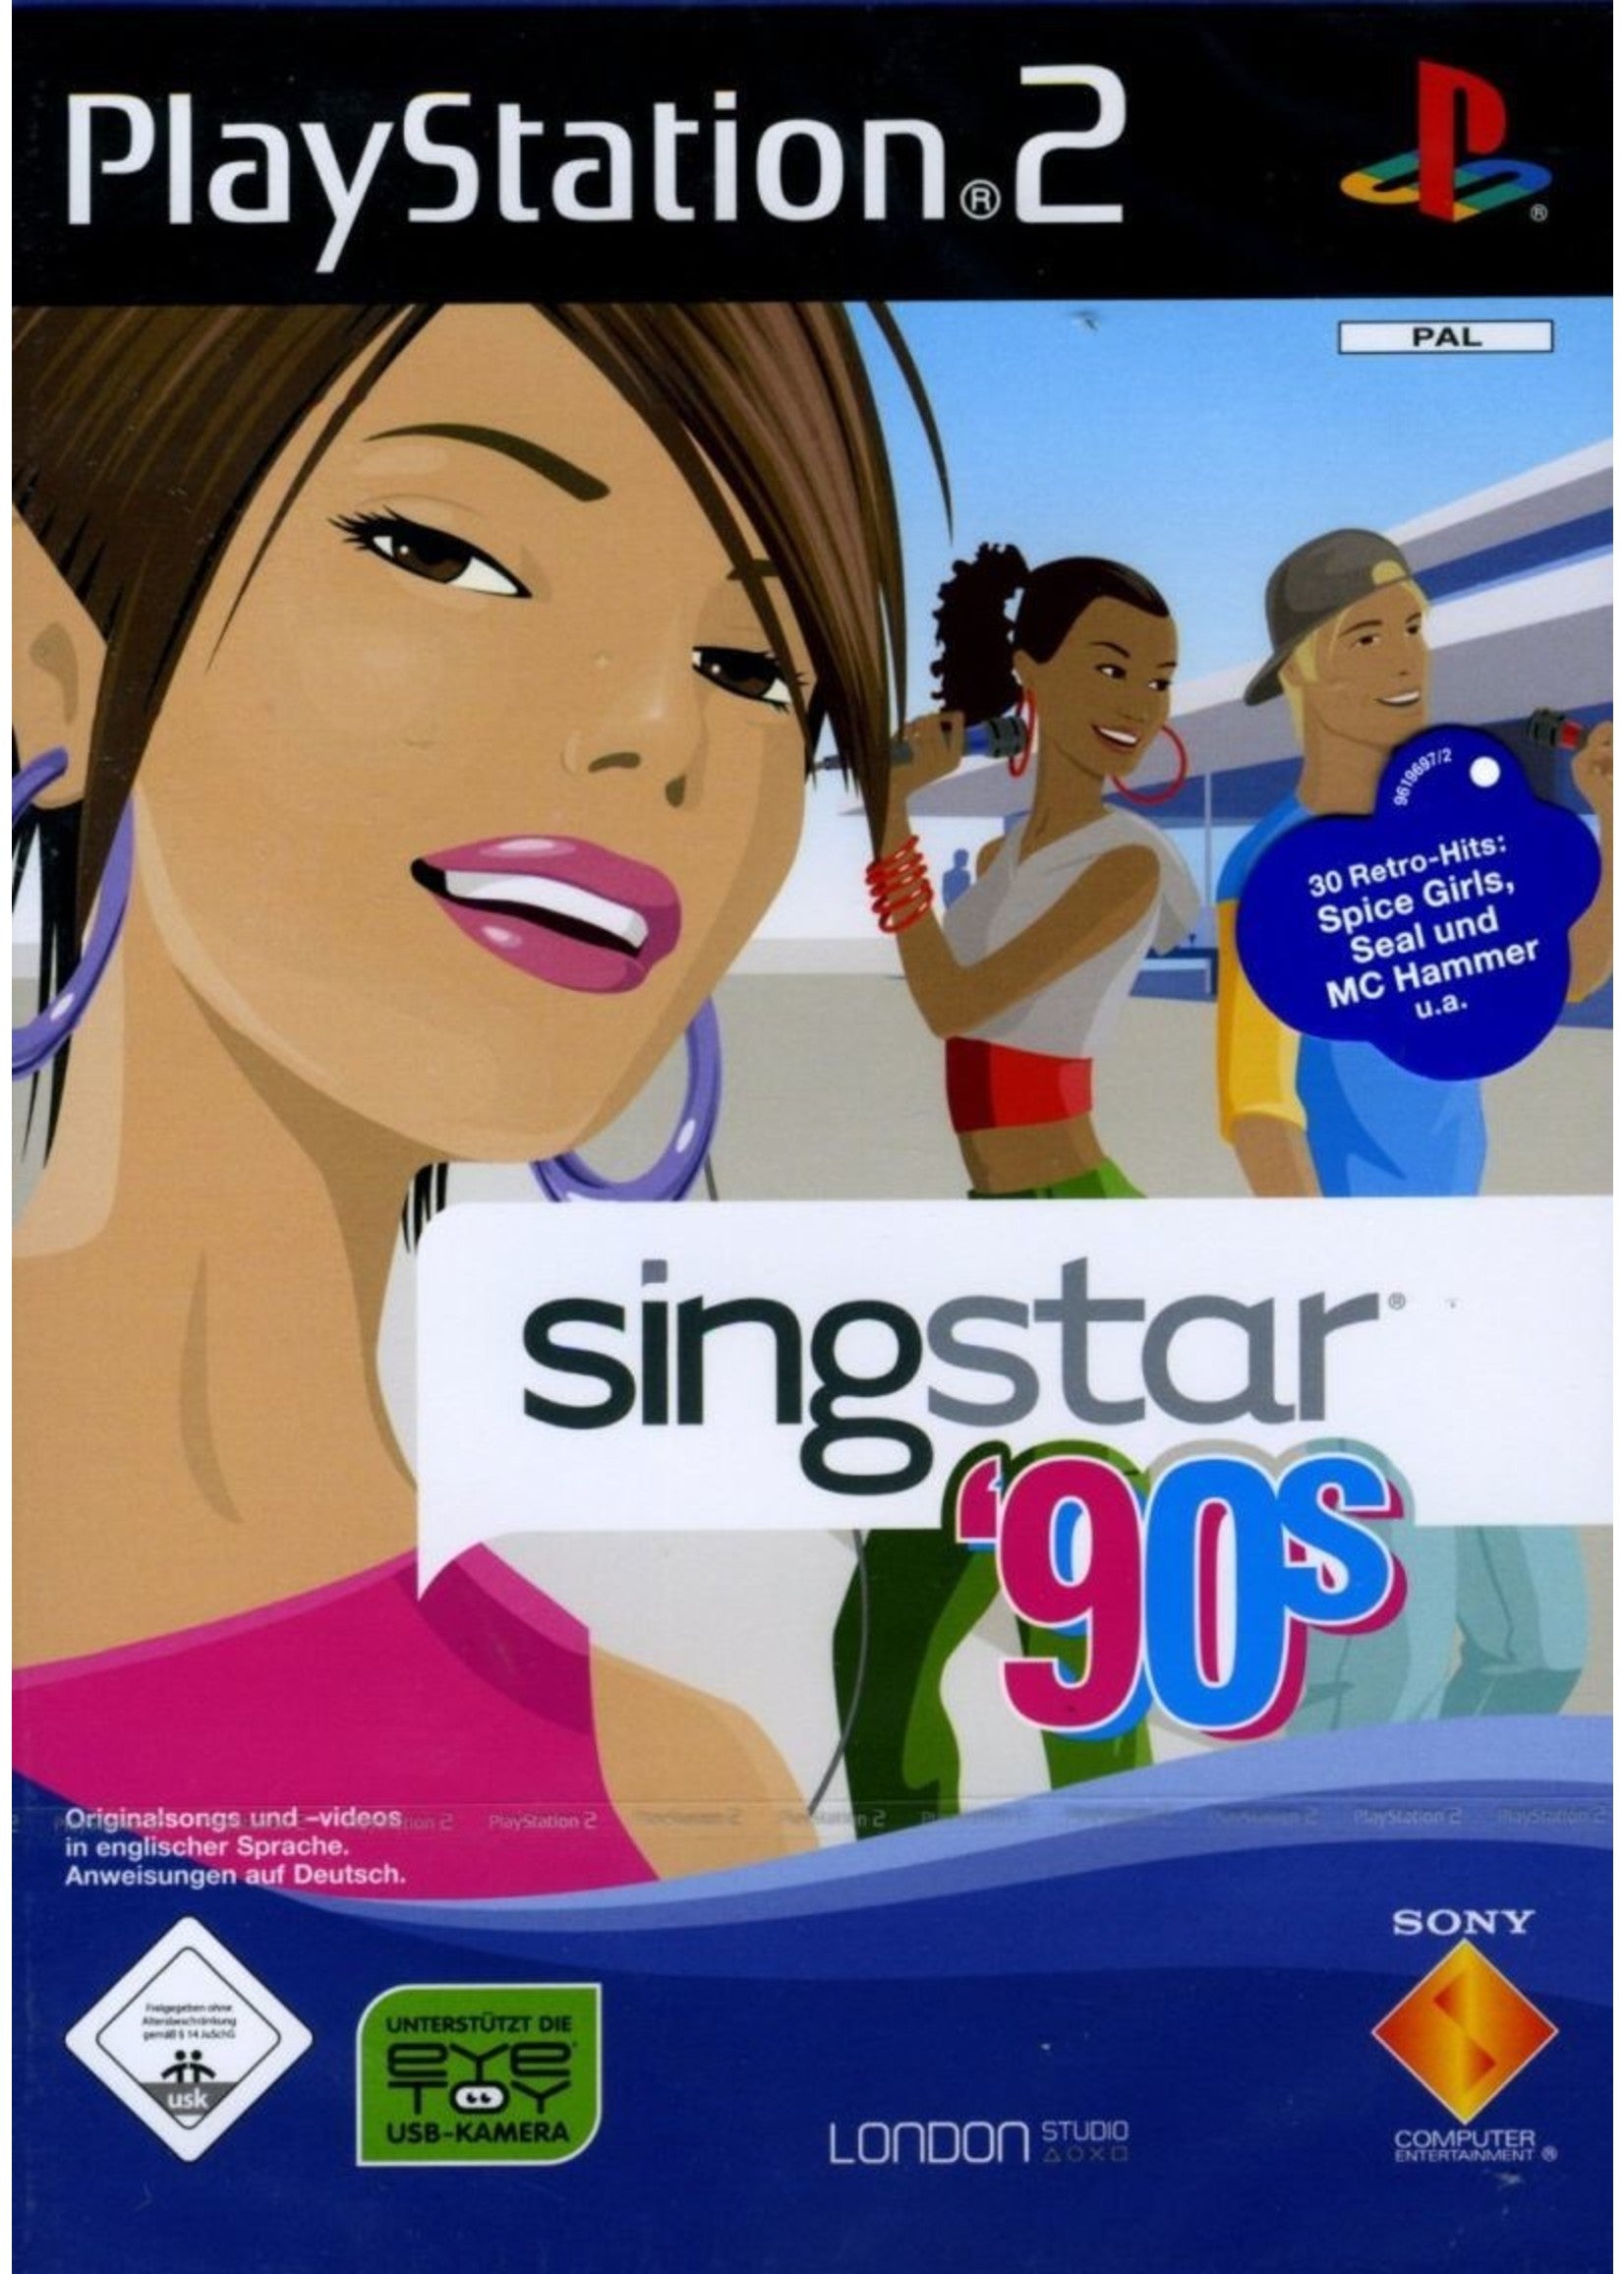 Accessory | PS2 | Singstar 90s Microphone Set with Game